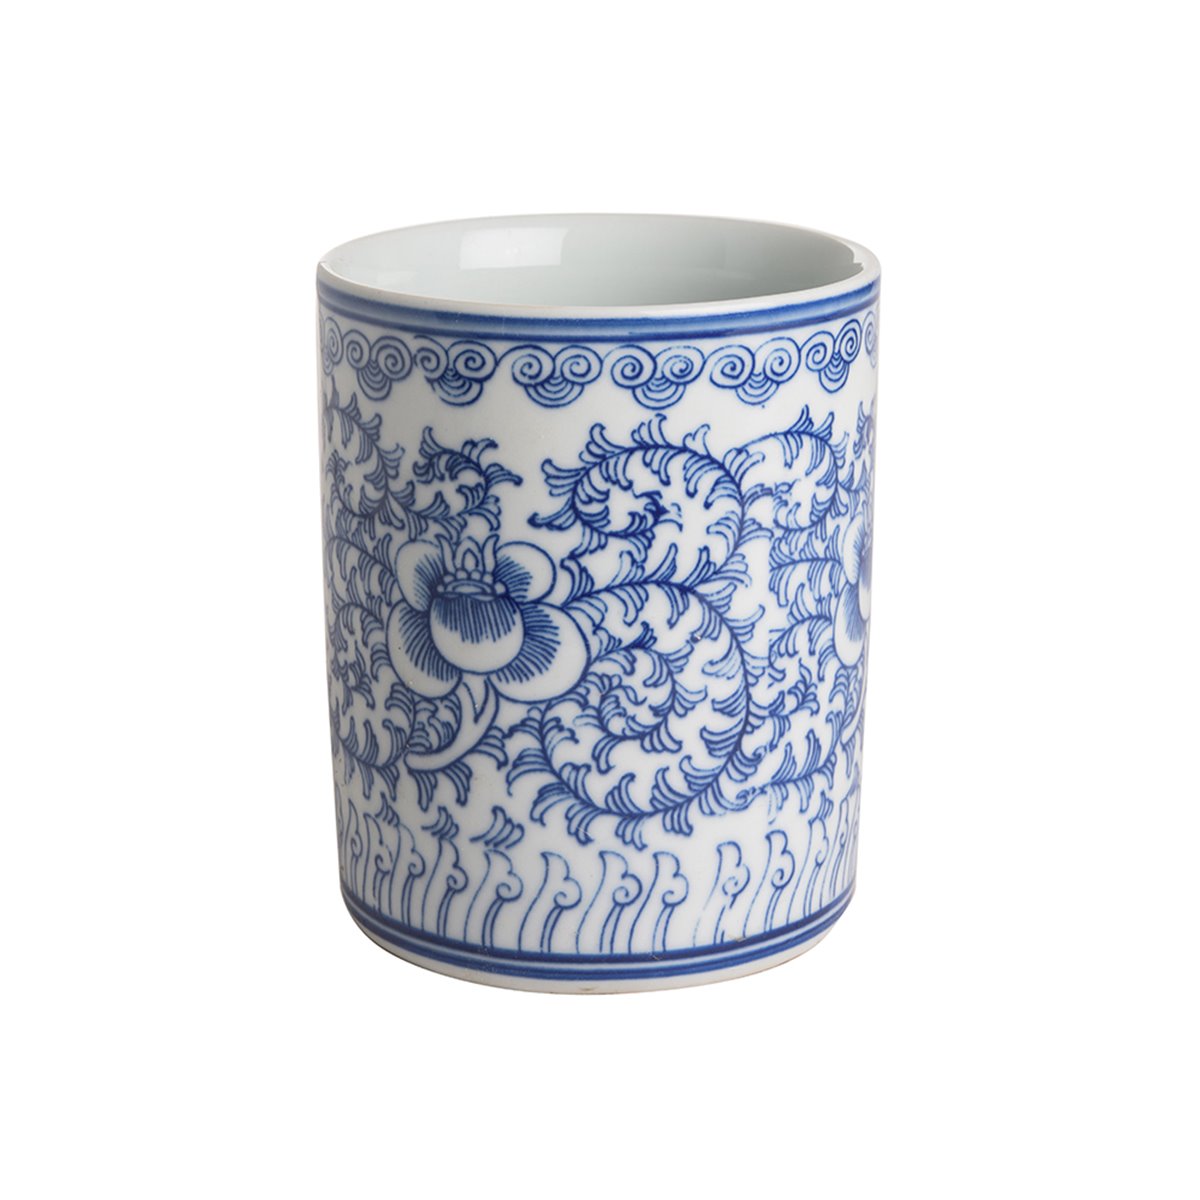 asia-tides-porcelain-orchid-pot-blue-and-white-collection